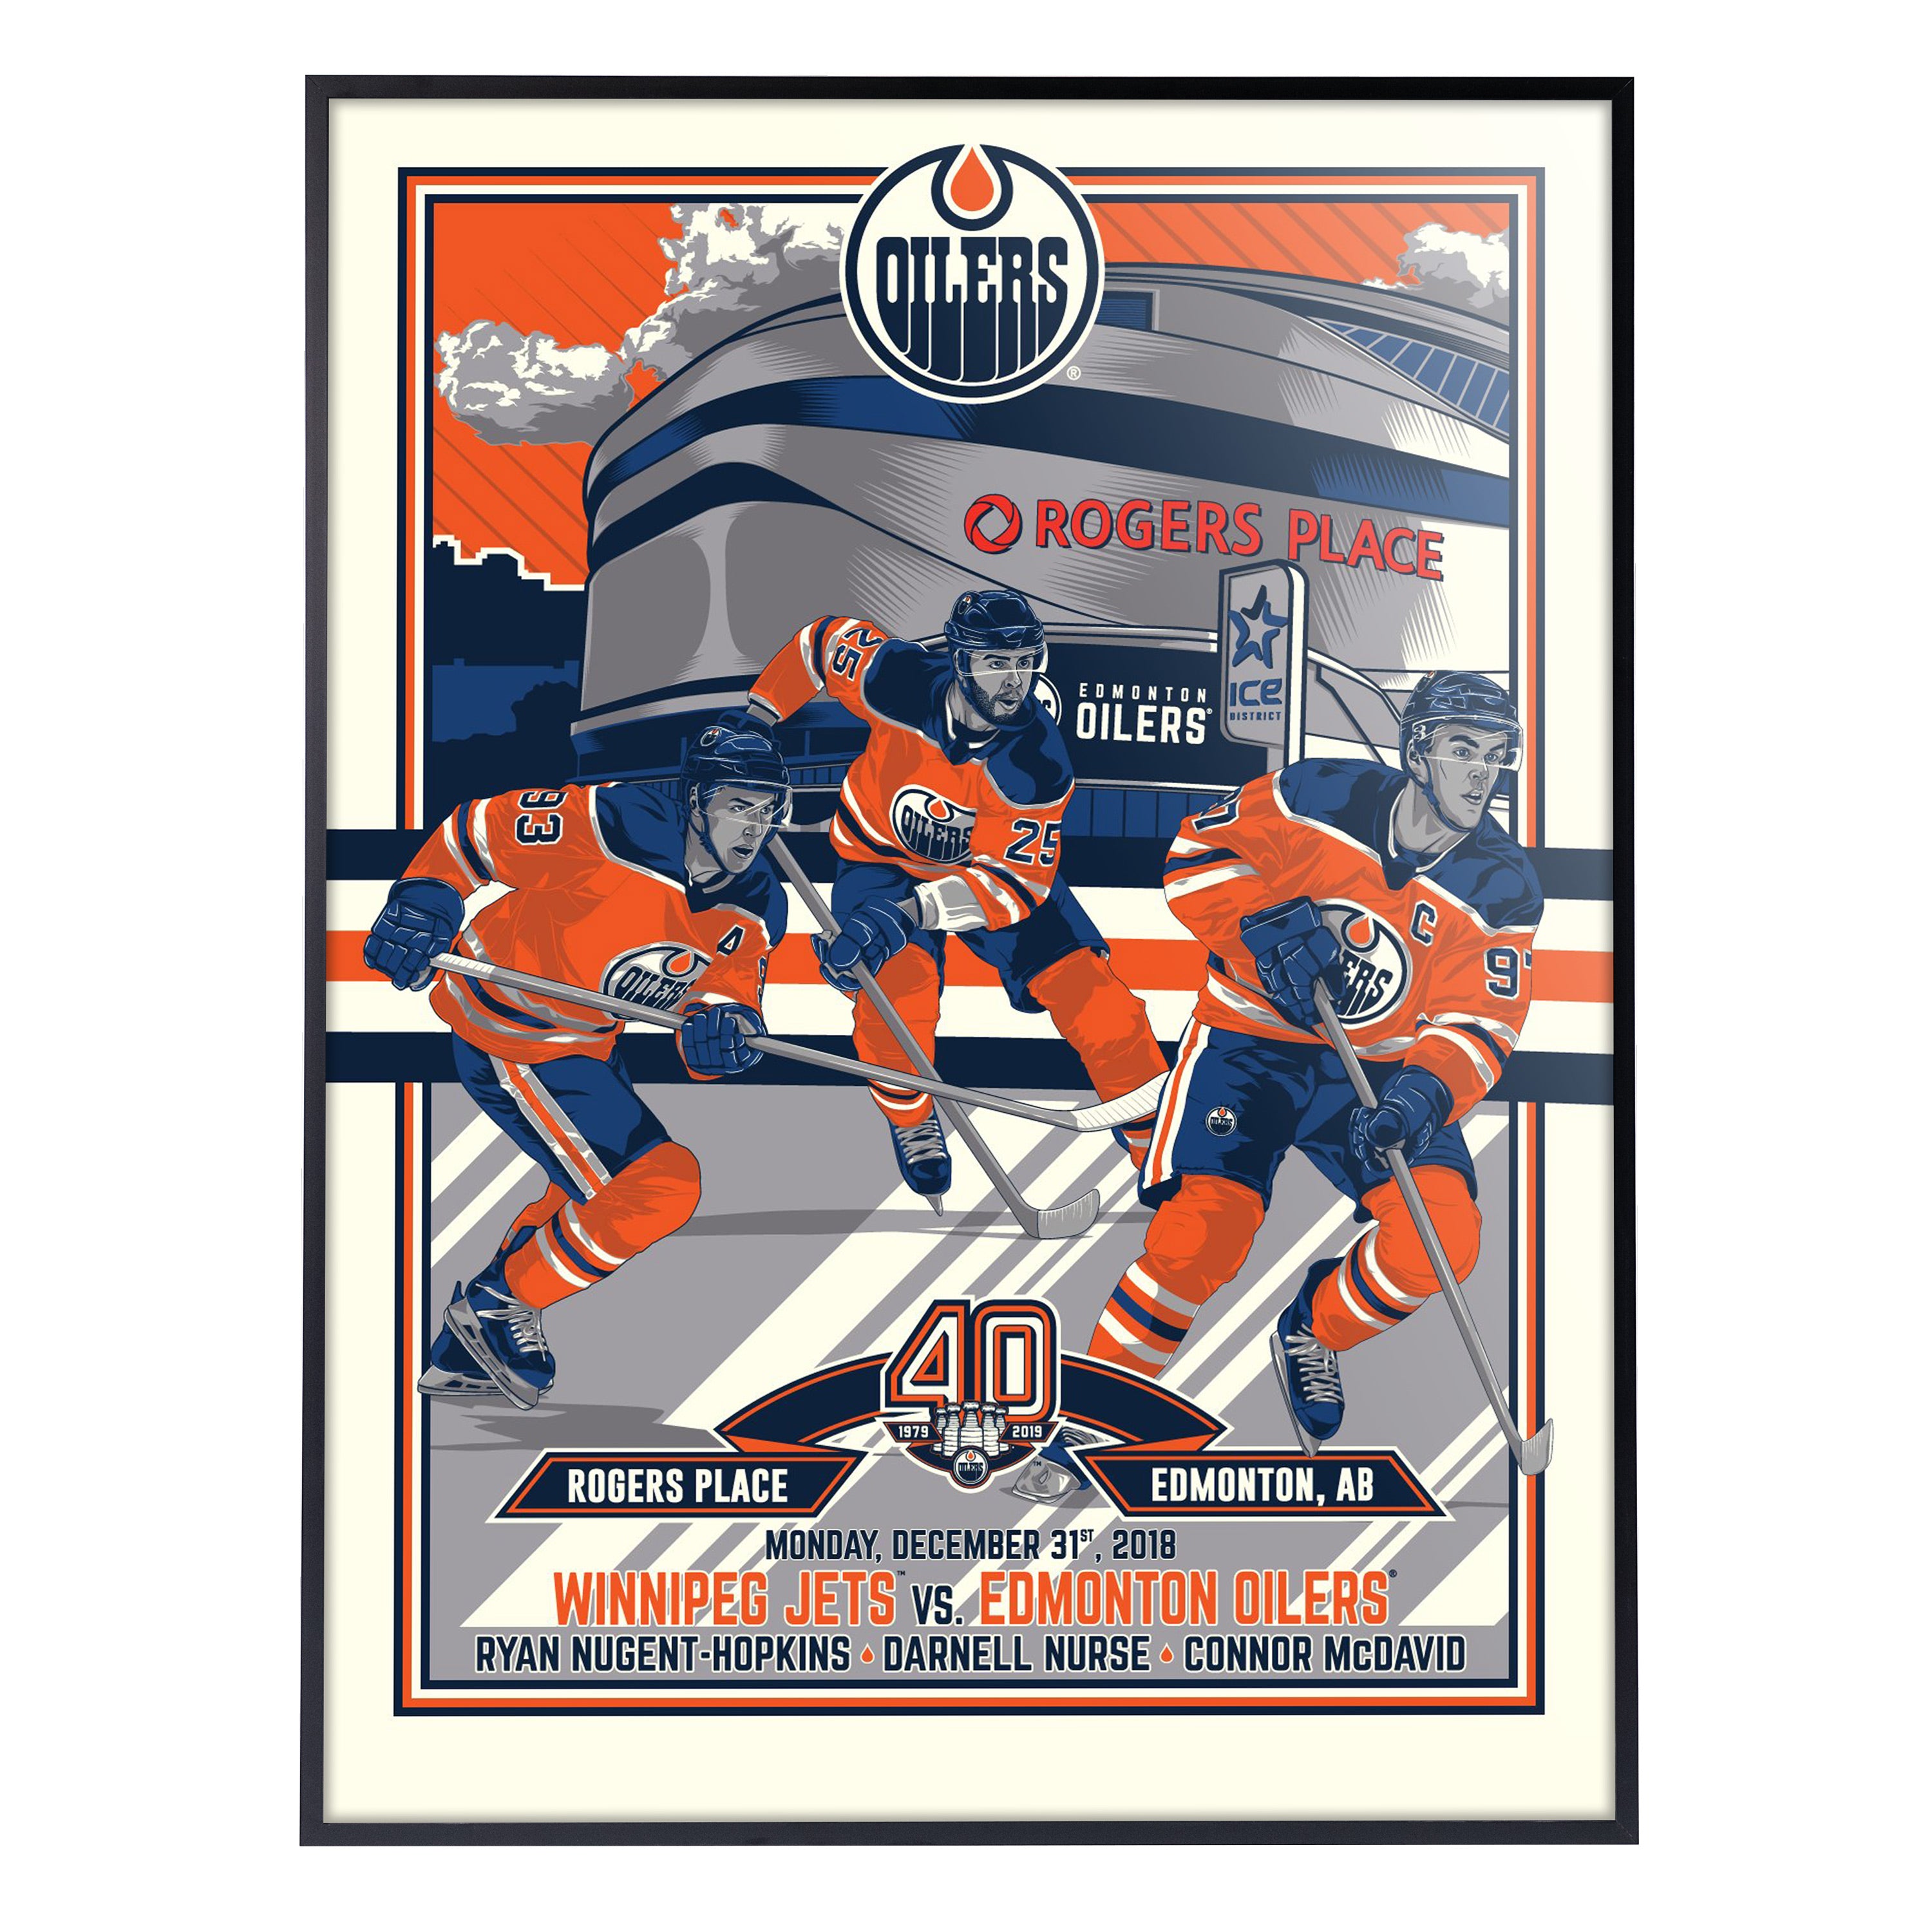 Oilers set throwback jersey nights for 40th anniversary